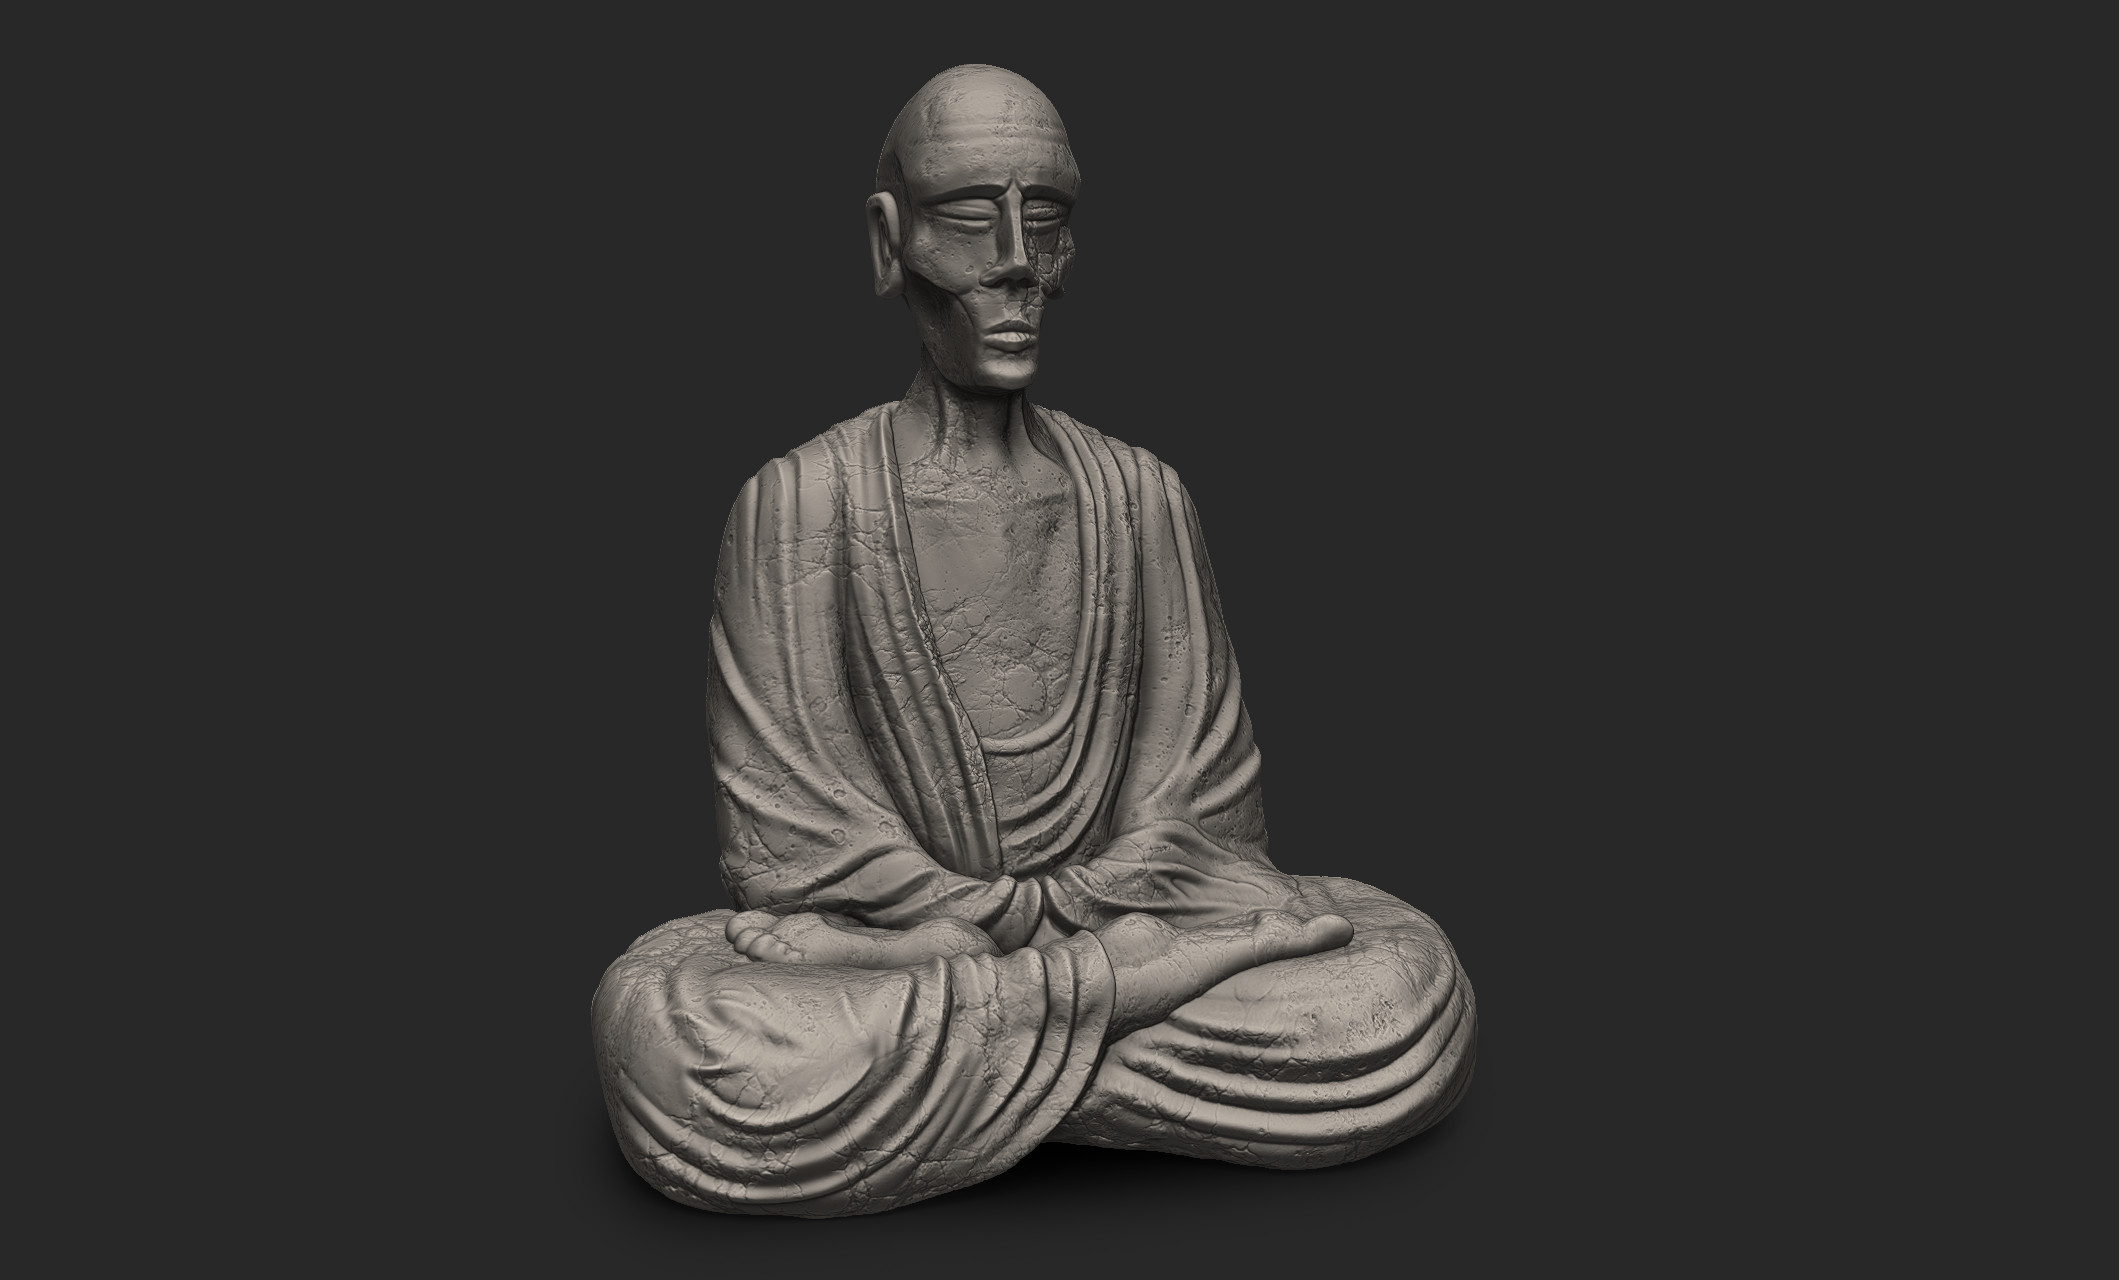 zBrush sculpt for the statue